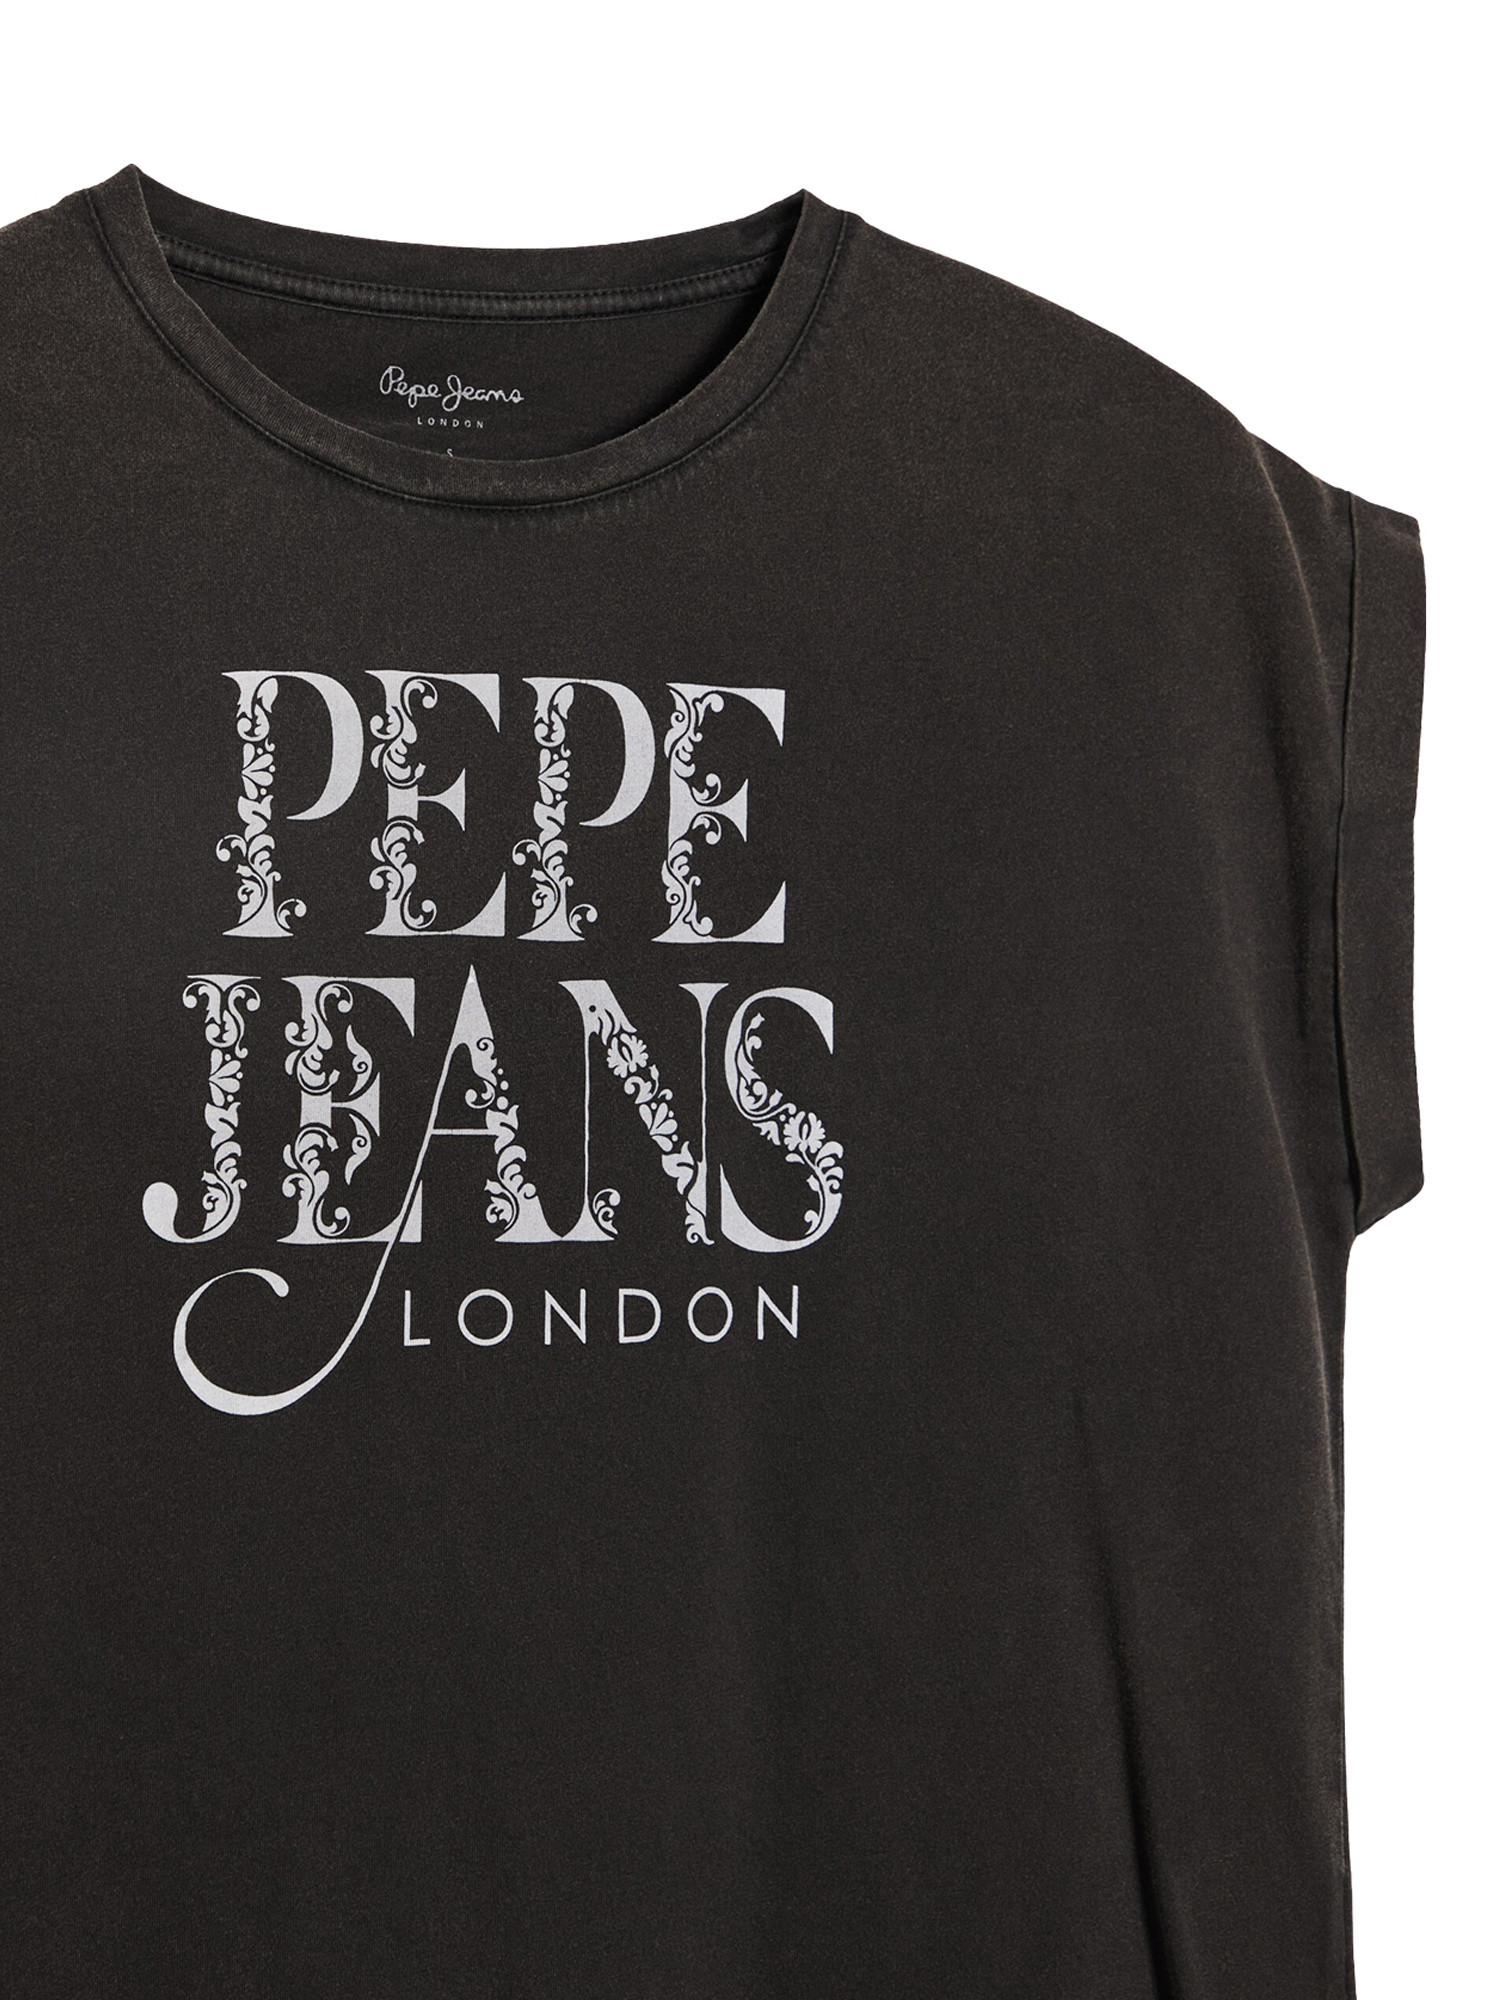 Pepe Jeans - T-shirt con logo in cotone, Nero, large image number 2